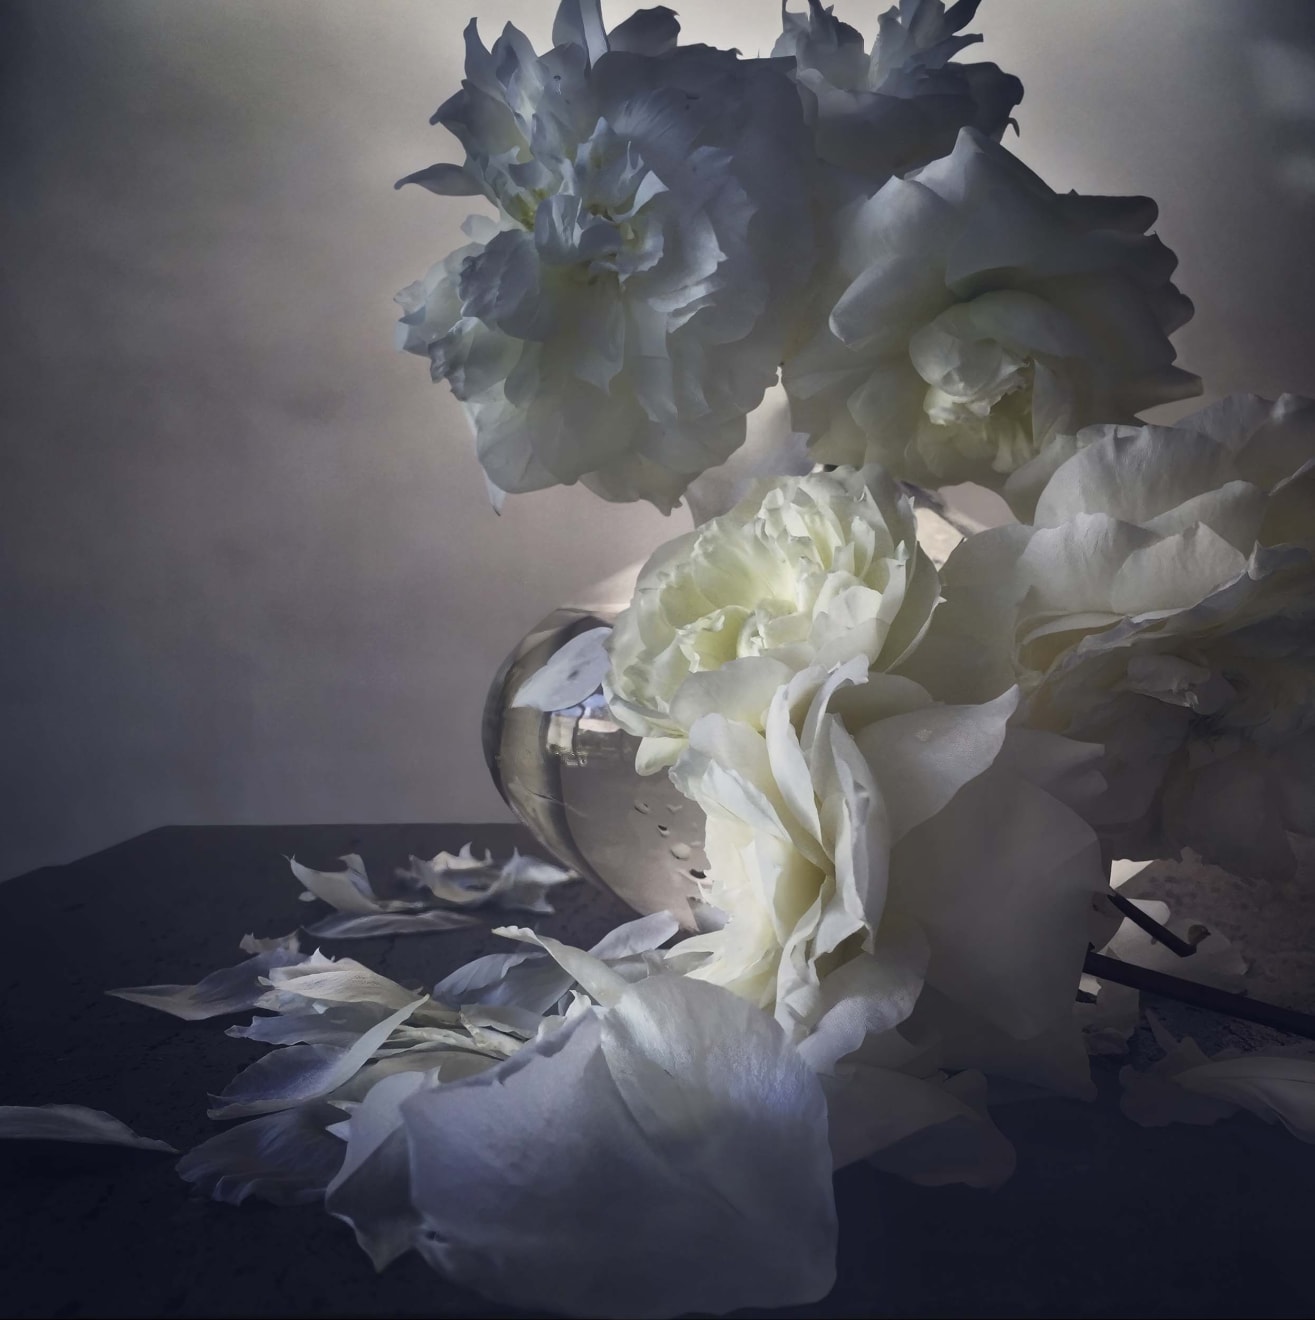 Nick Knight Sunday 7th July, 2013, 2019 Hand-coated pigment print (KNI 022)